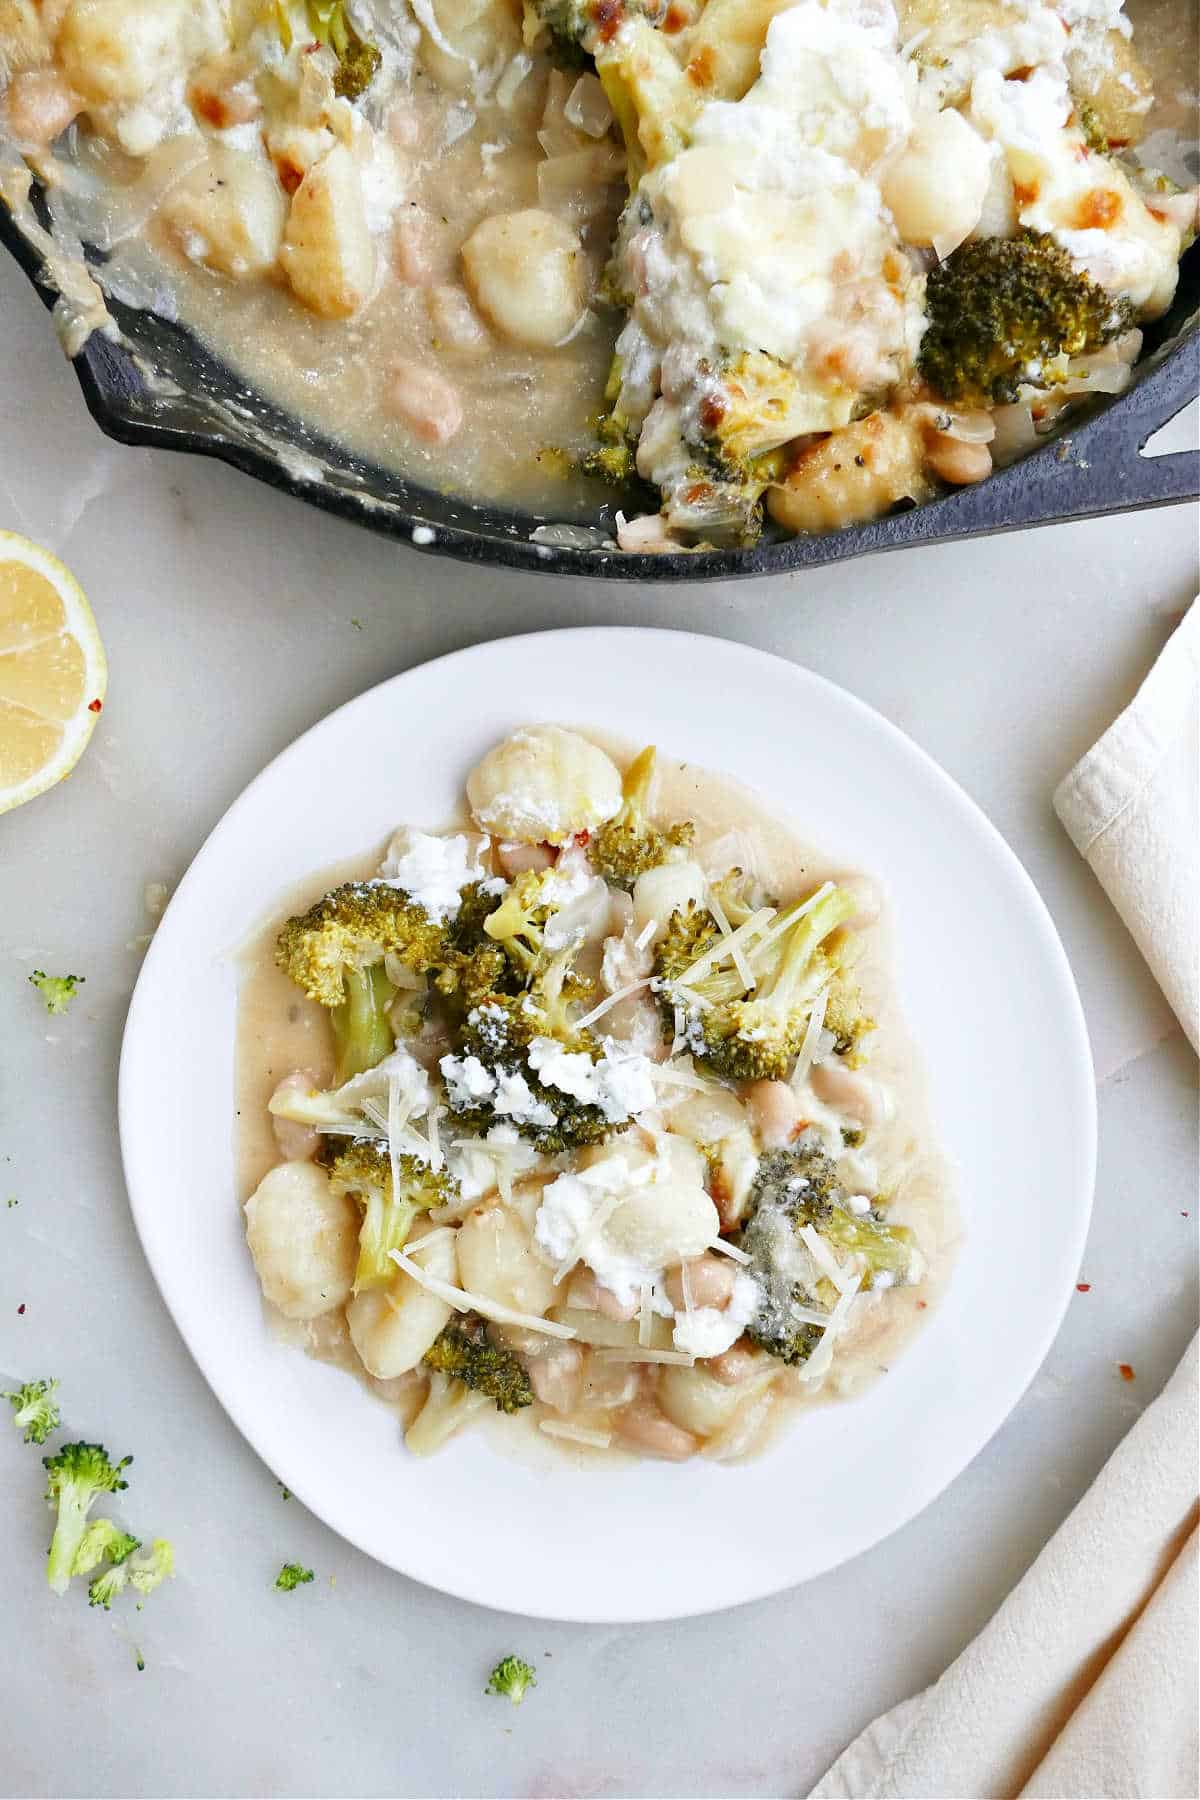 broccoli, gnocchi, and cheese casserole on a plate next to skillet